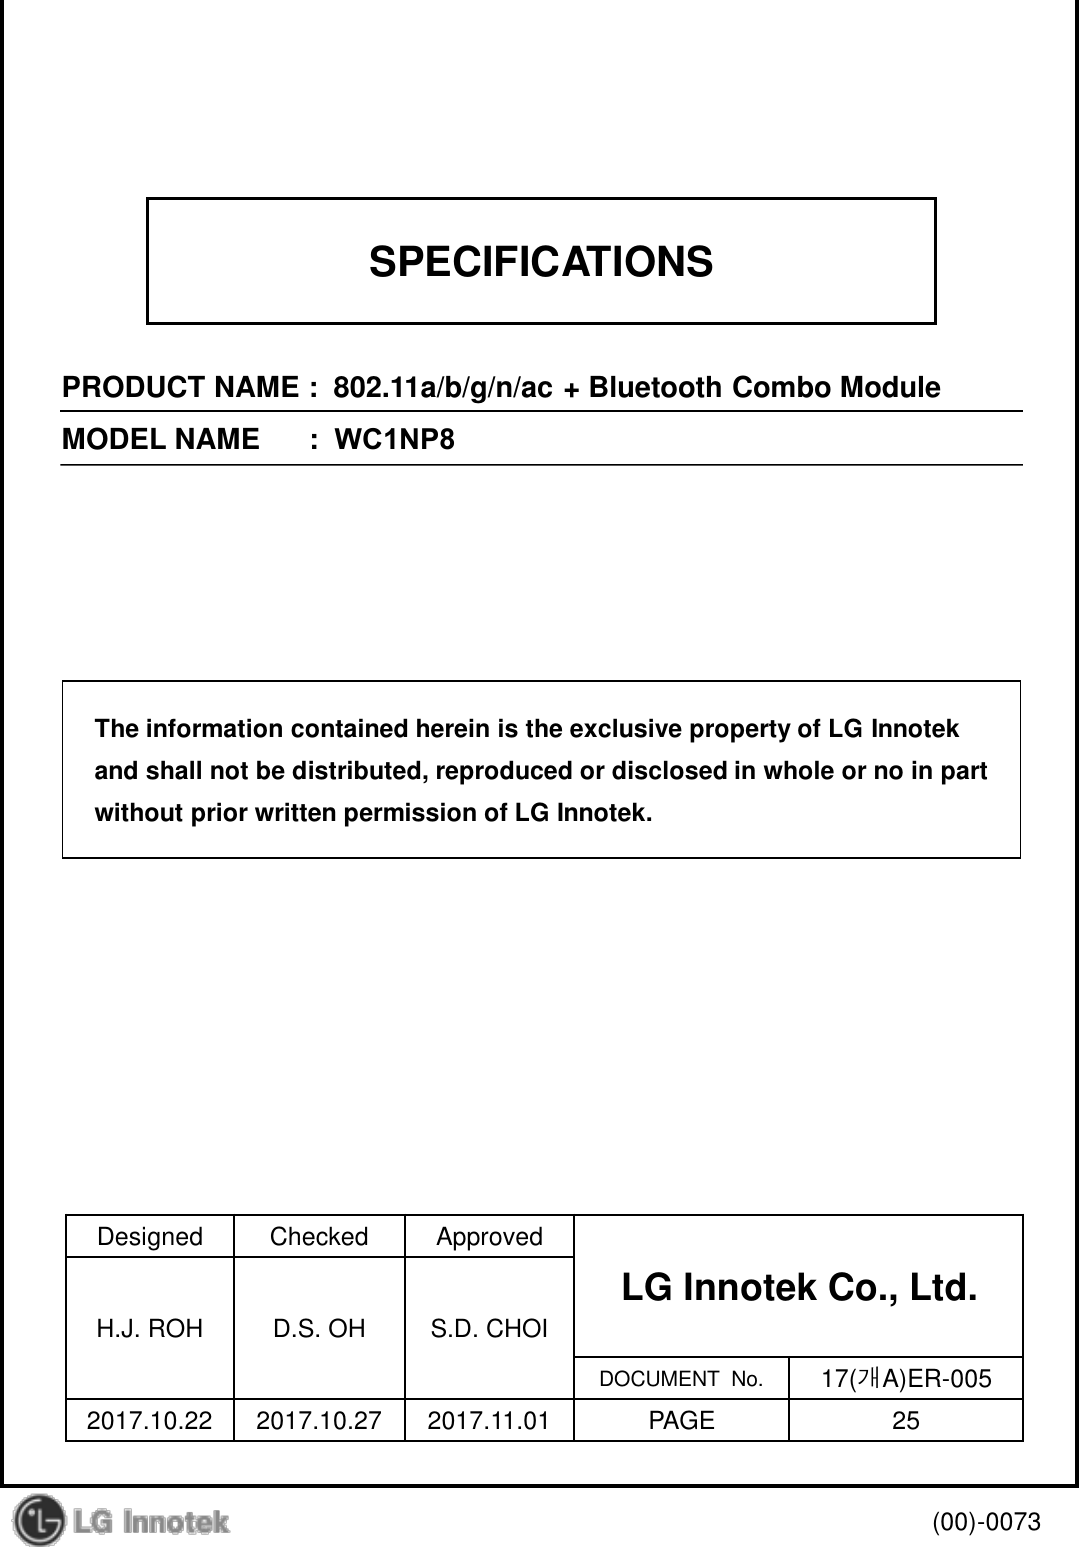 SPECIFICATIONS PRODUCT NAME :  802.11a/b/g/n/ac + Bluetooth Combo Module MODEL NAME    :  WC1NP8 Designed  Checked  Approved LG Innotek Co., Ltd. H.J. ROH  D.S. OH  S.D. CHOI DOCUMENT  No.  17(개A)ER-005 2017.10.22  2017.10.27  2017.11.01  PAGE  25 (00)-0073 The information contained herein is the exclusive property of LG Innotek and shall not be distributed, reproduced or disclosed in whole or no in part without prior written permission of LG Innotek. 